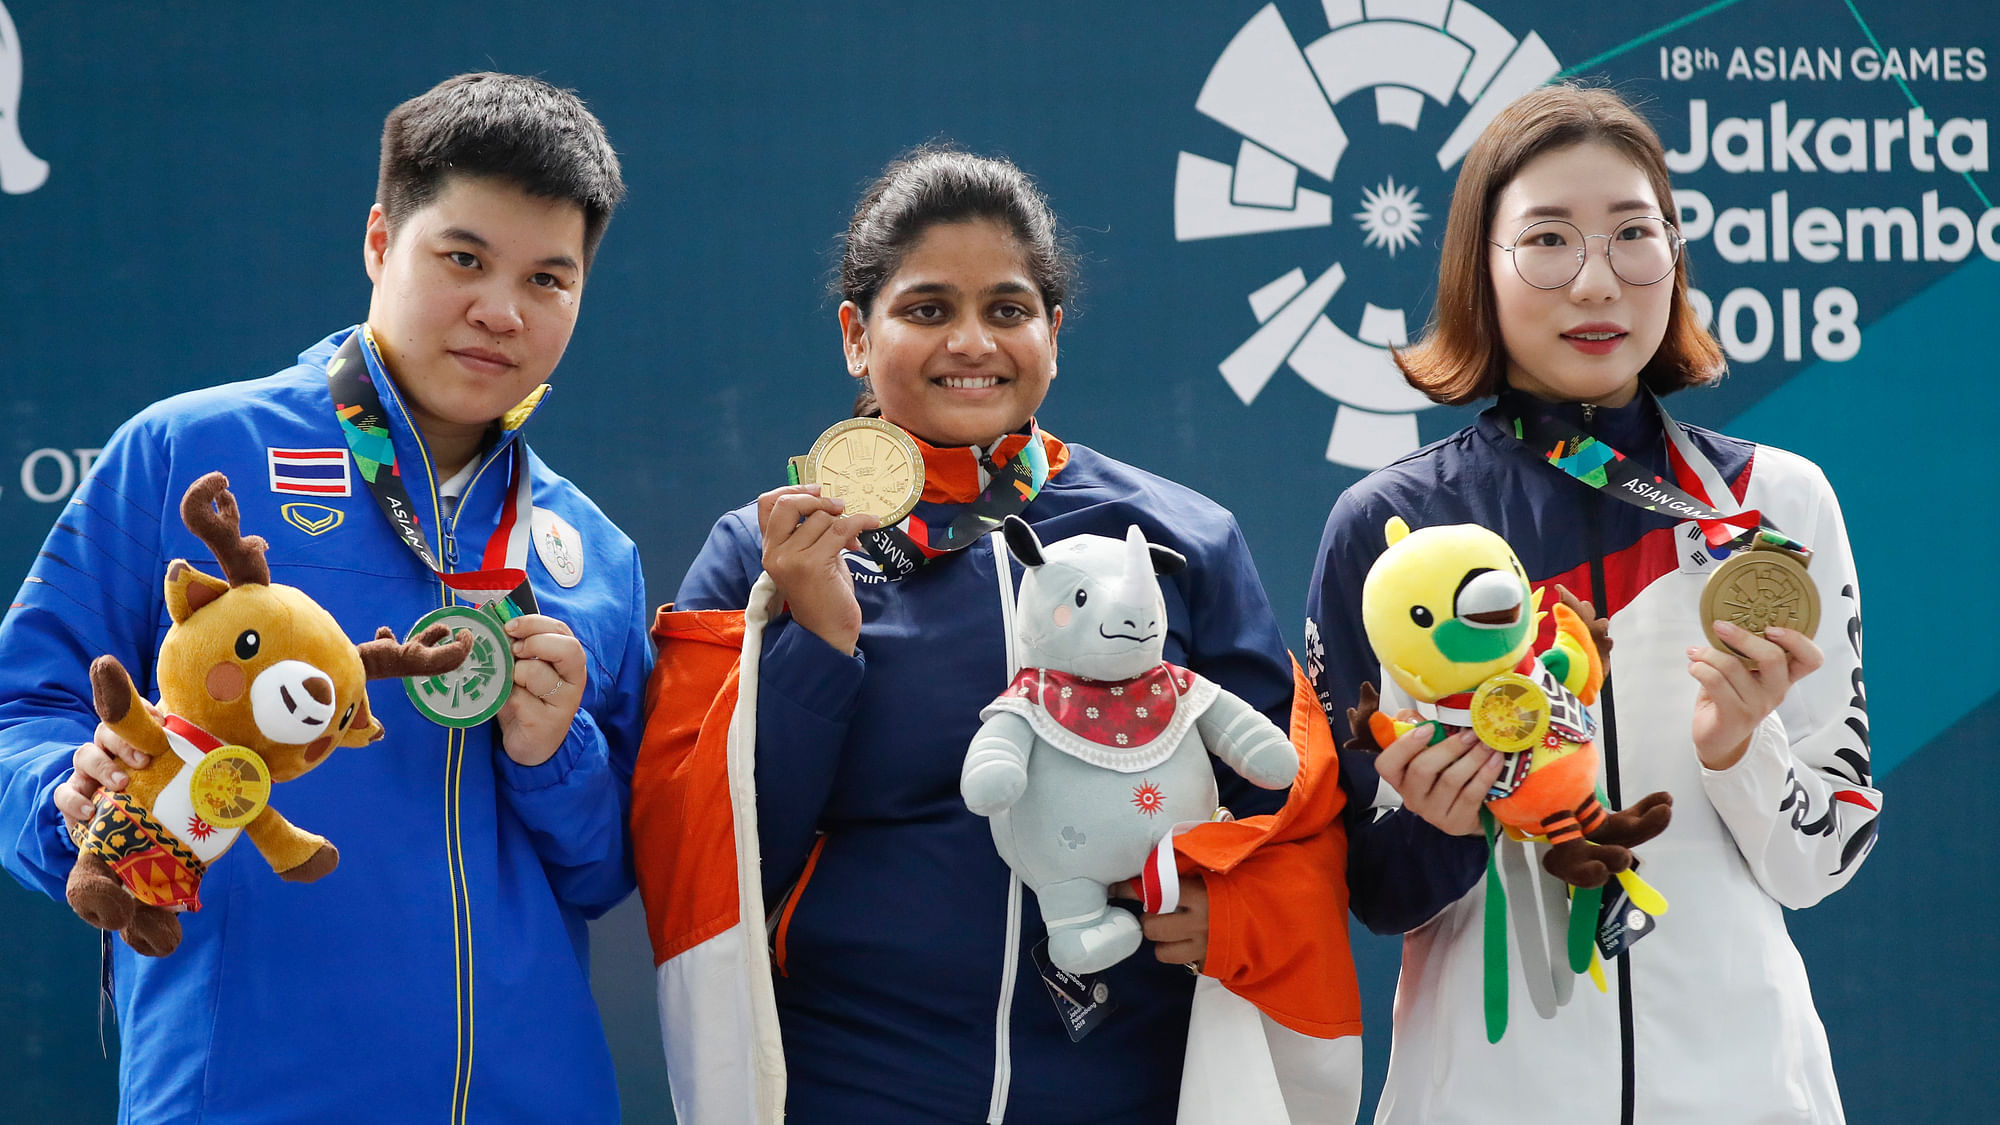 Silver medalist Thailand’s Naphaswan Yangpaiboon, left, gold medalist India’s Rahi Jeevan Sarnobat, center, and bonze medalist South Korea’s Kim Minjung display their medal the final round of the 25m pistol women’s shooting event at the 18th Asian Games in Palembang, Indonesia, Wednesday, Aug. 22, 2018.&nbsp;